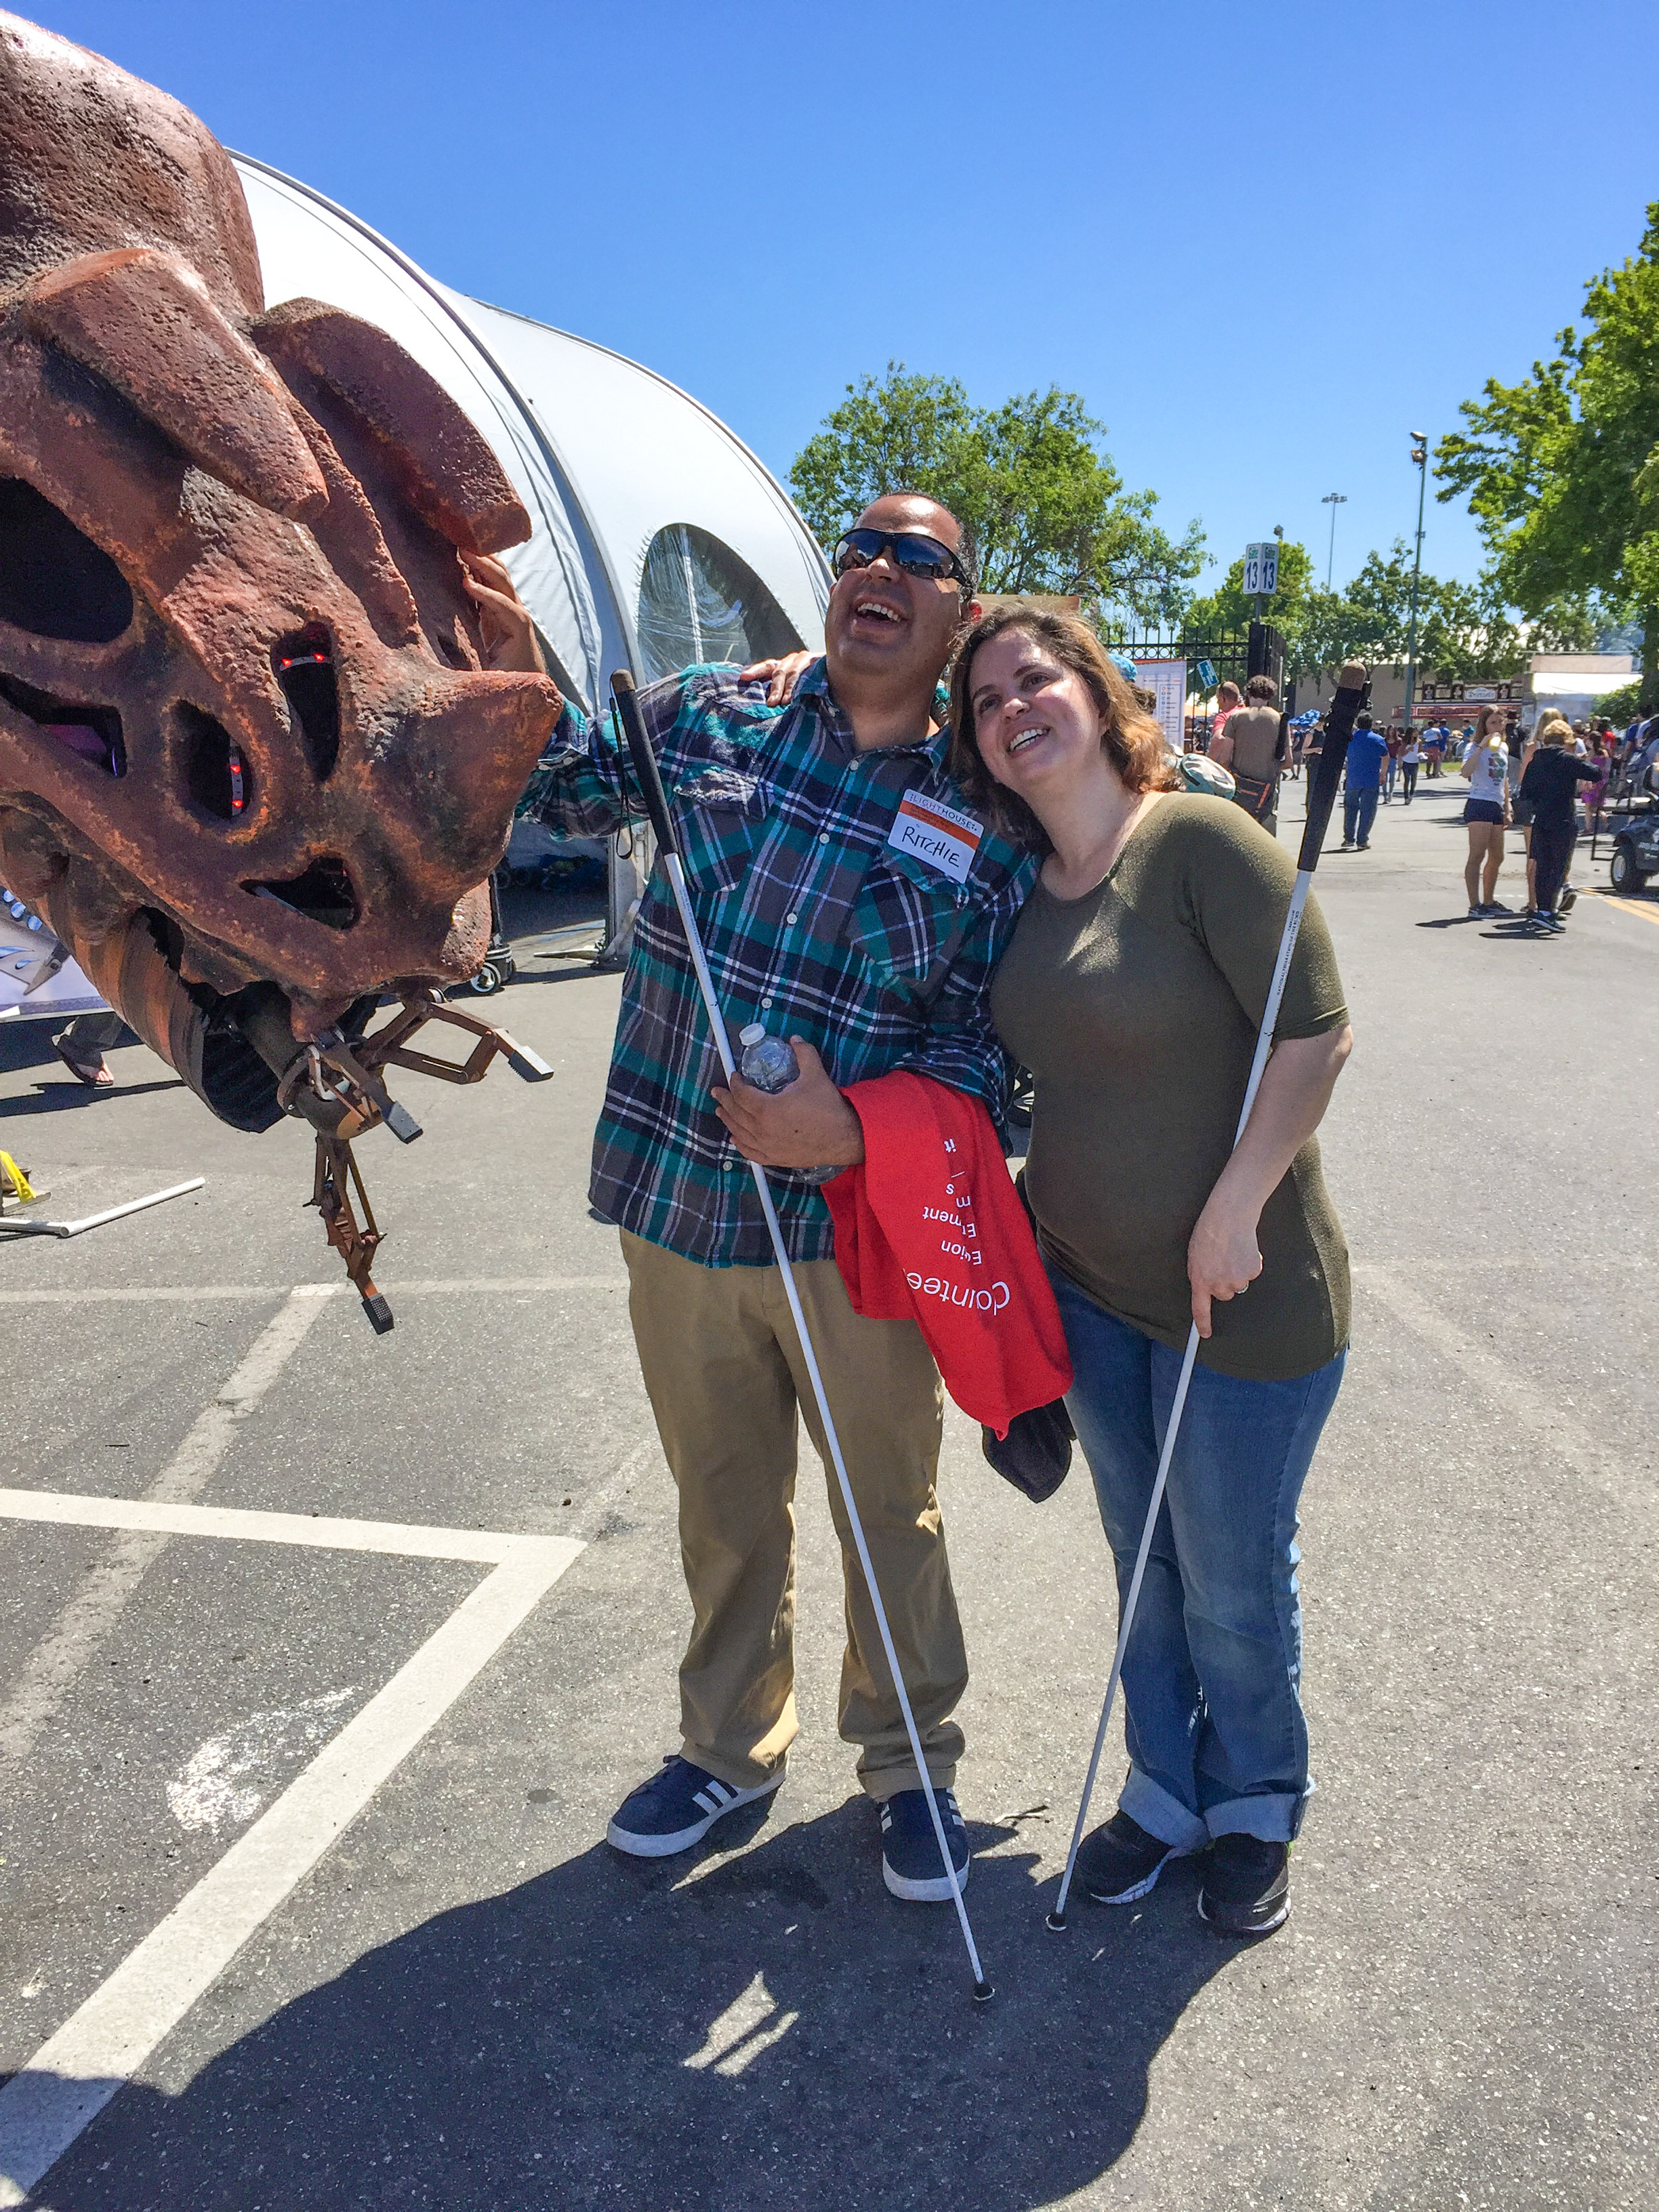 Richie and a participant stand next to a robotic dinosaur.